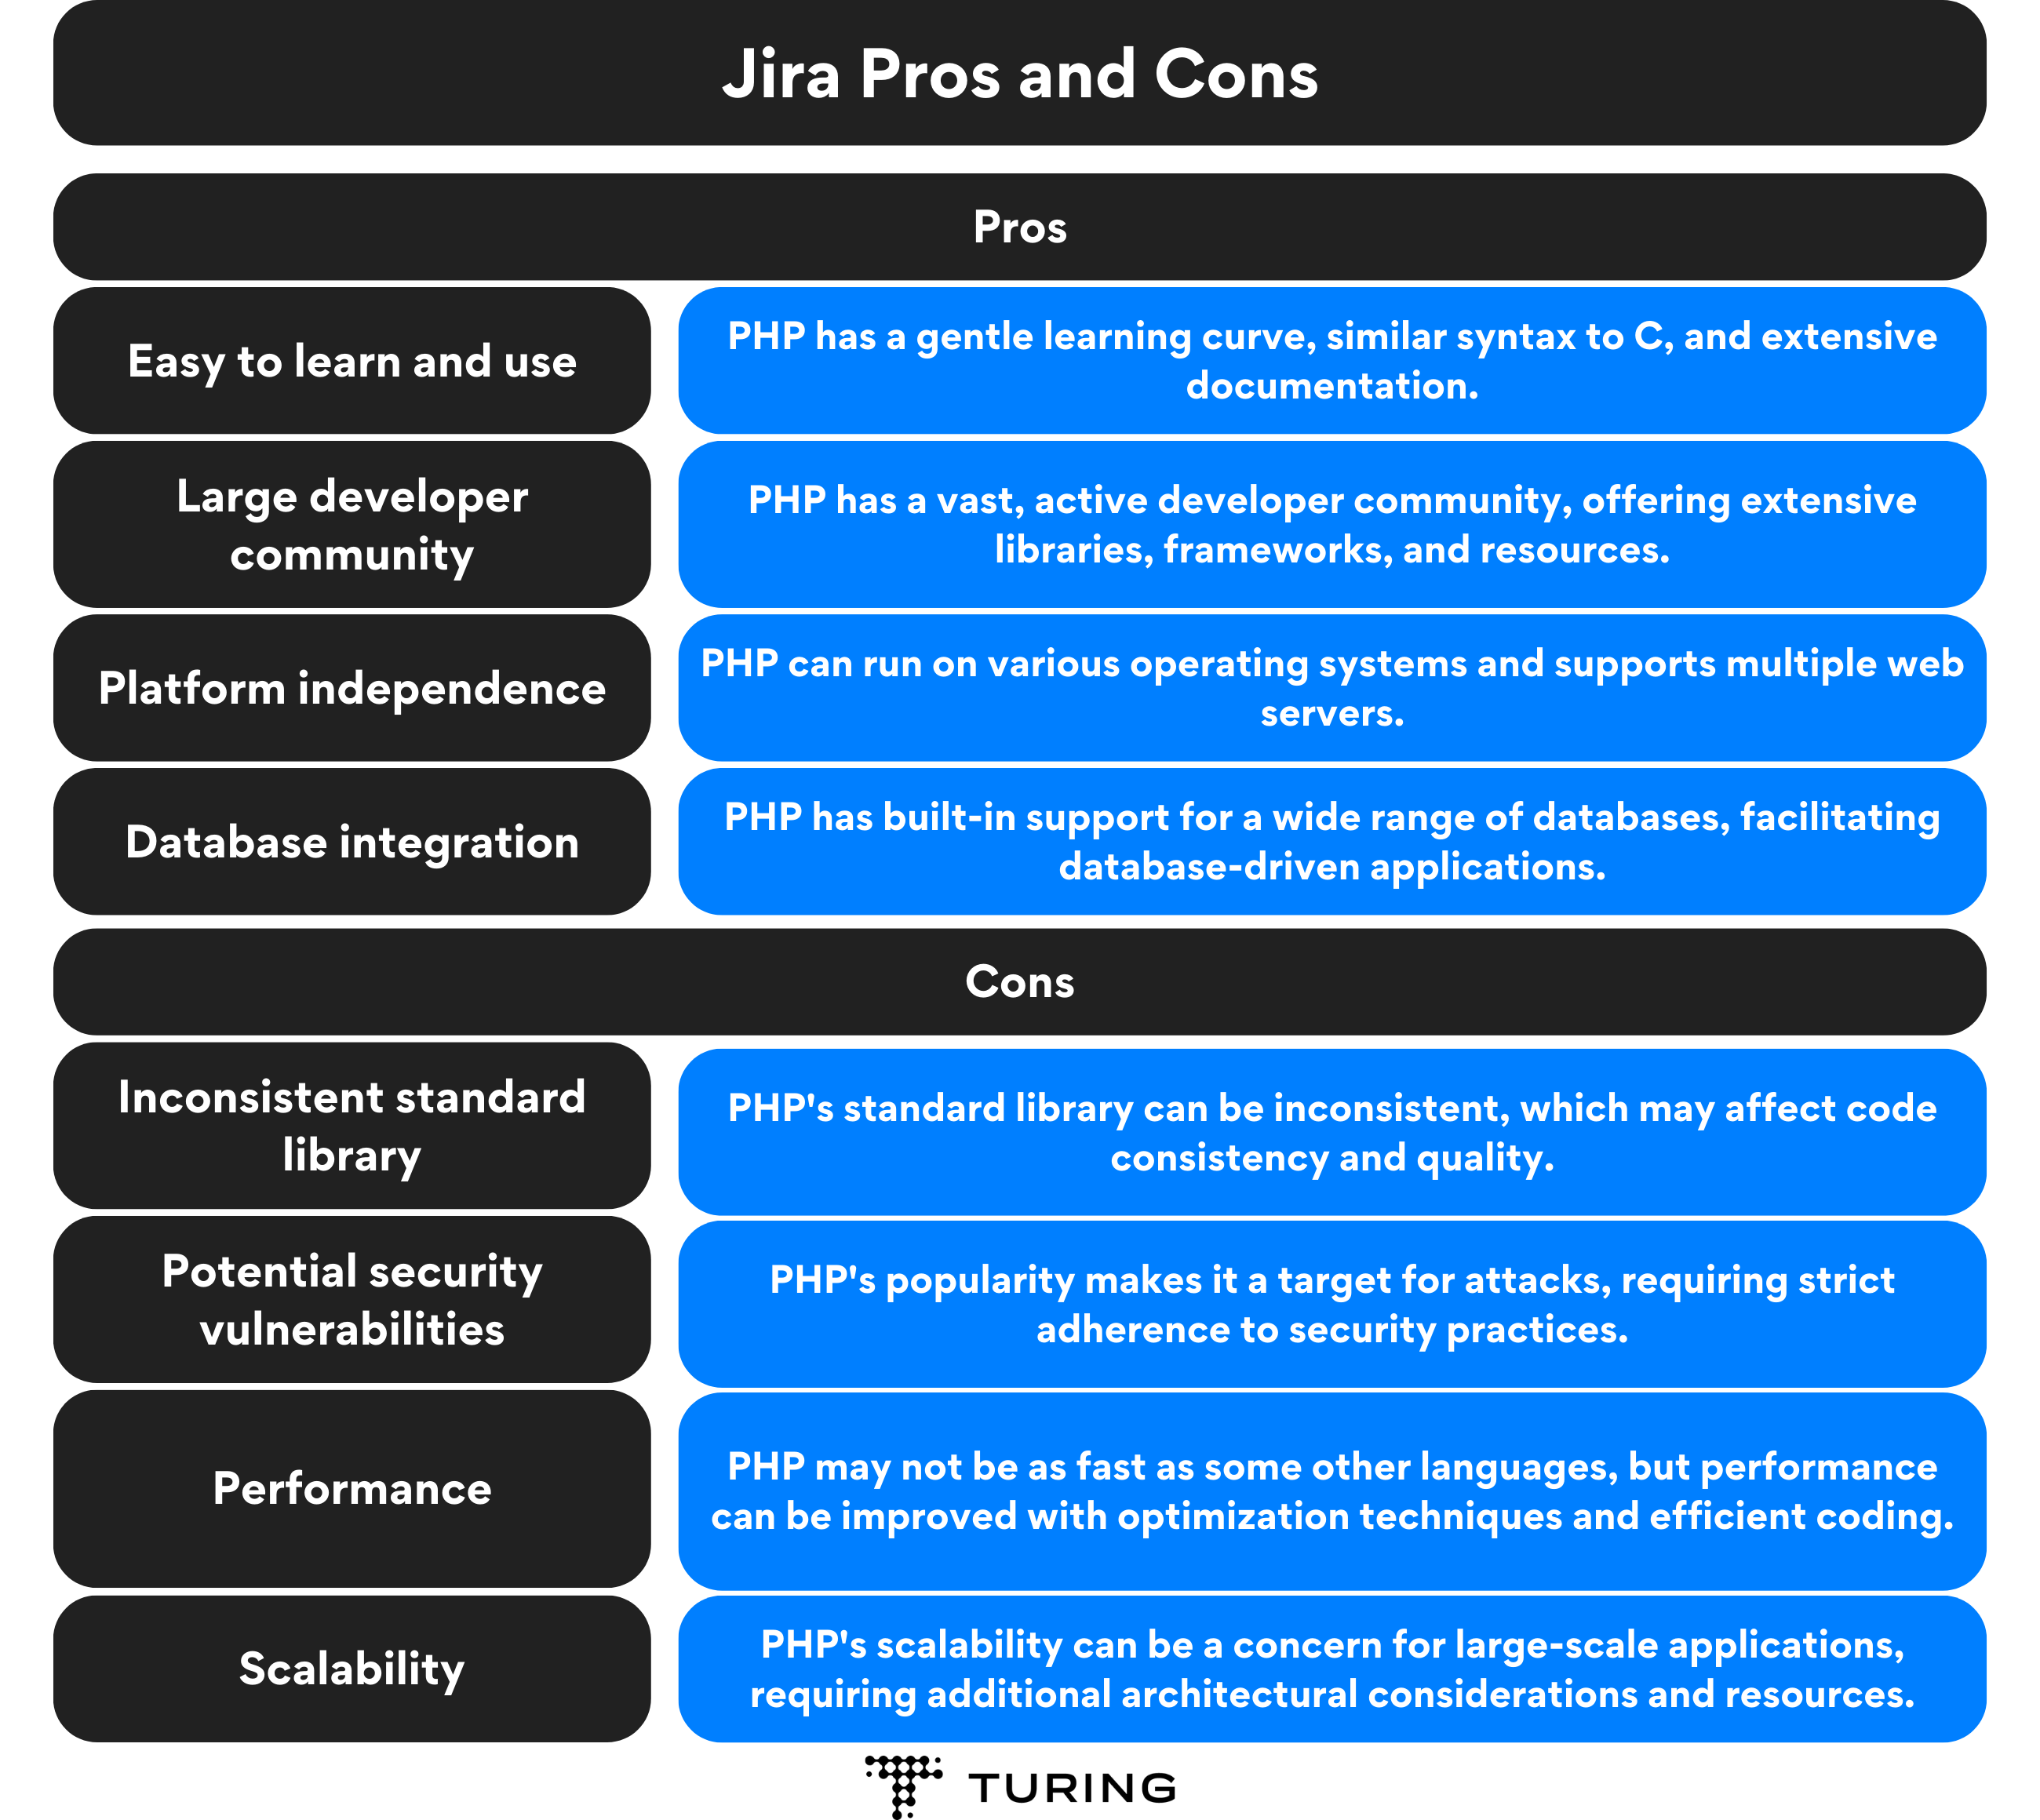 Jira Pros and Cons